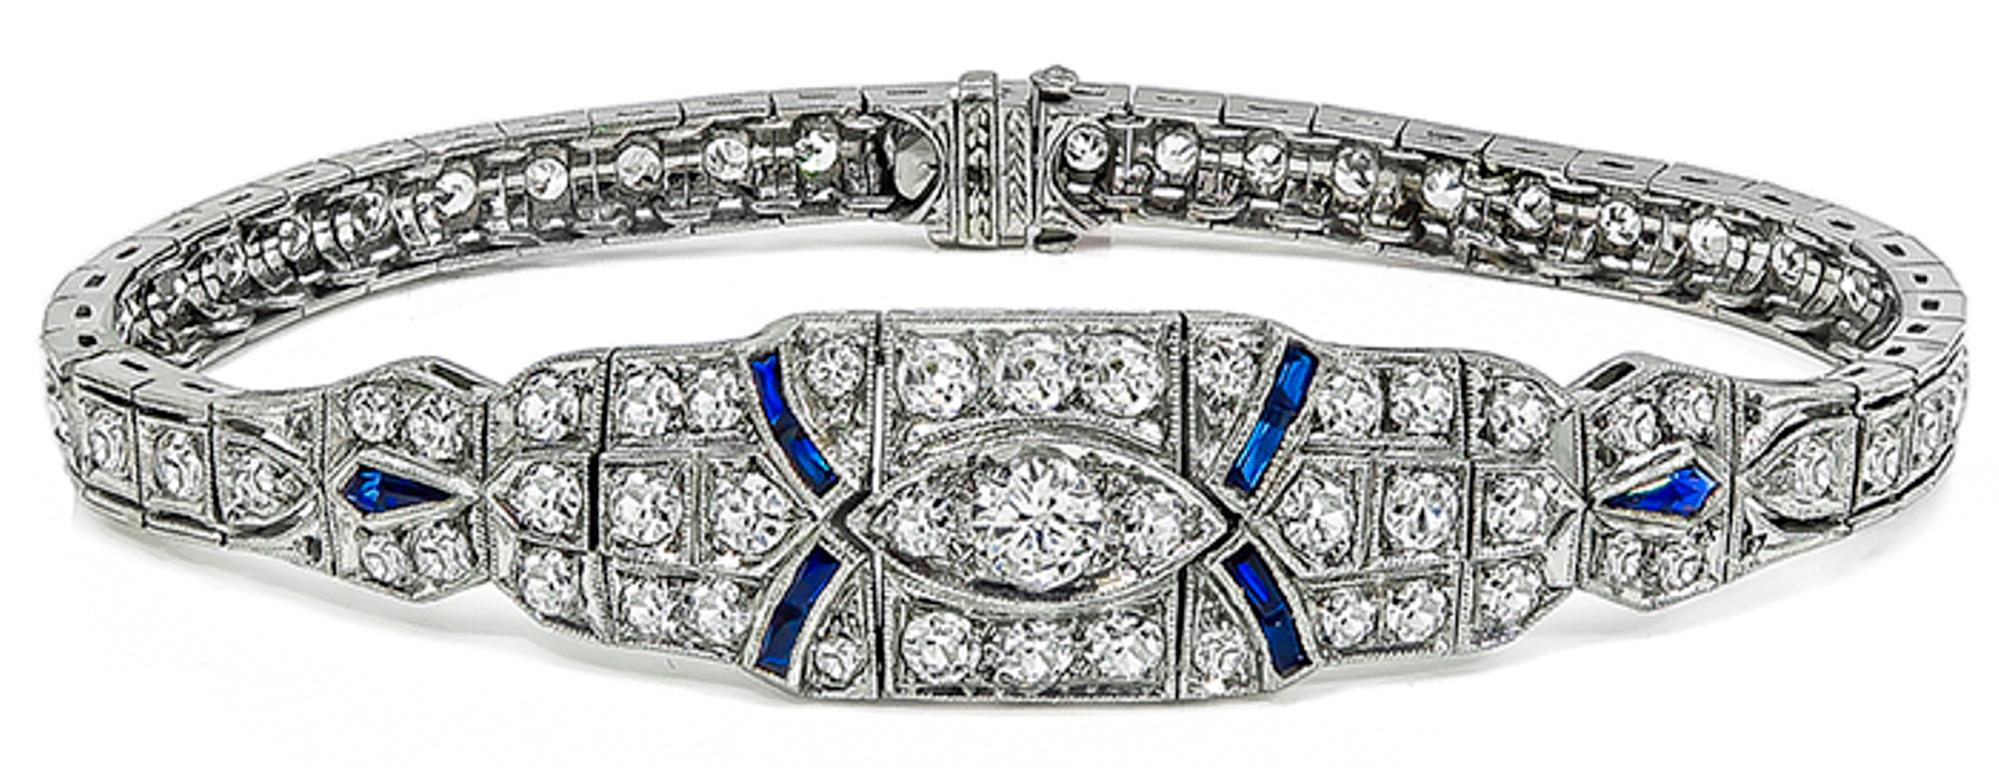 This amazing platinum bracelet from the art Deco era is set with sparkling round cut diamonds that weigh approximately 3.00ct. graded G color with Vs clarity. The diamonds are accentuated by lovely sapphire accents. The bracelet measures 6 3/4